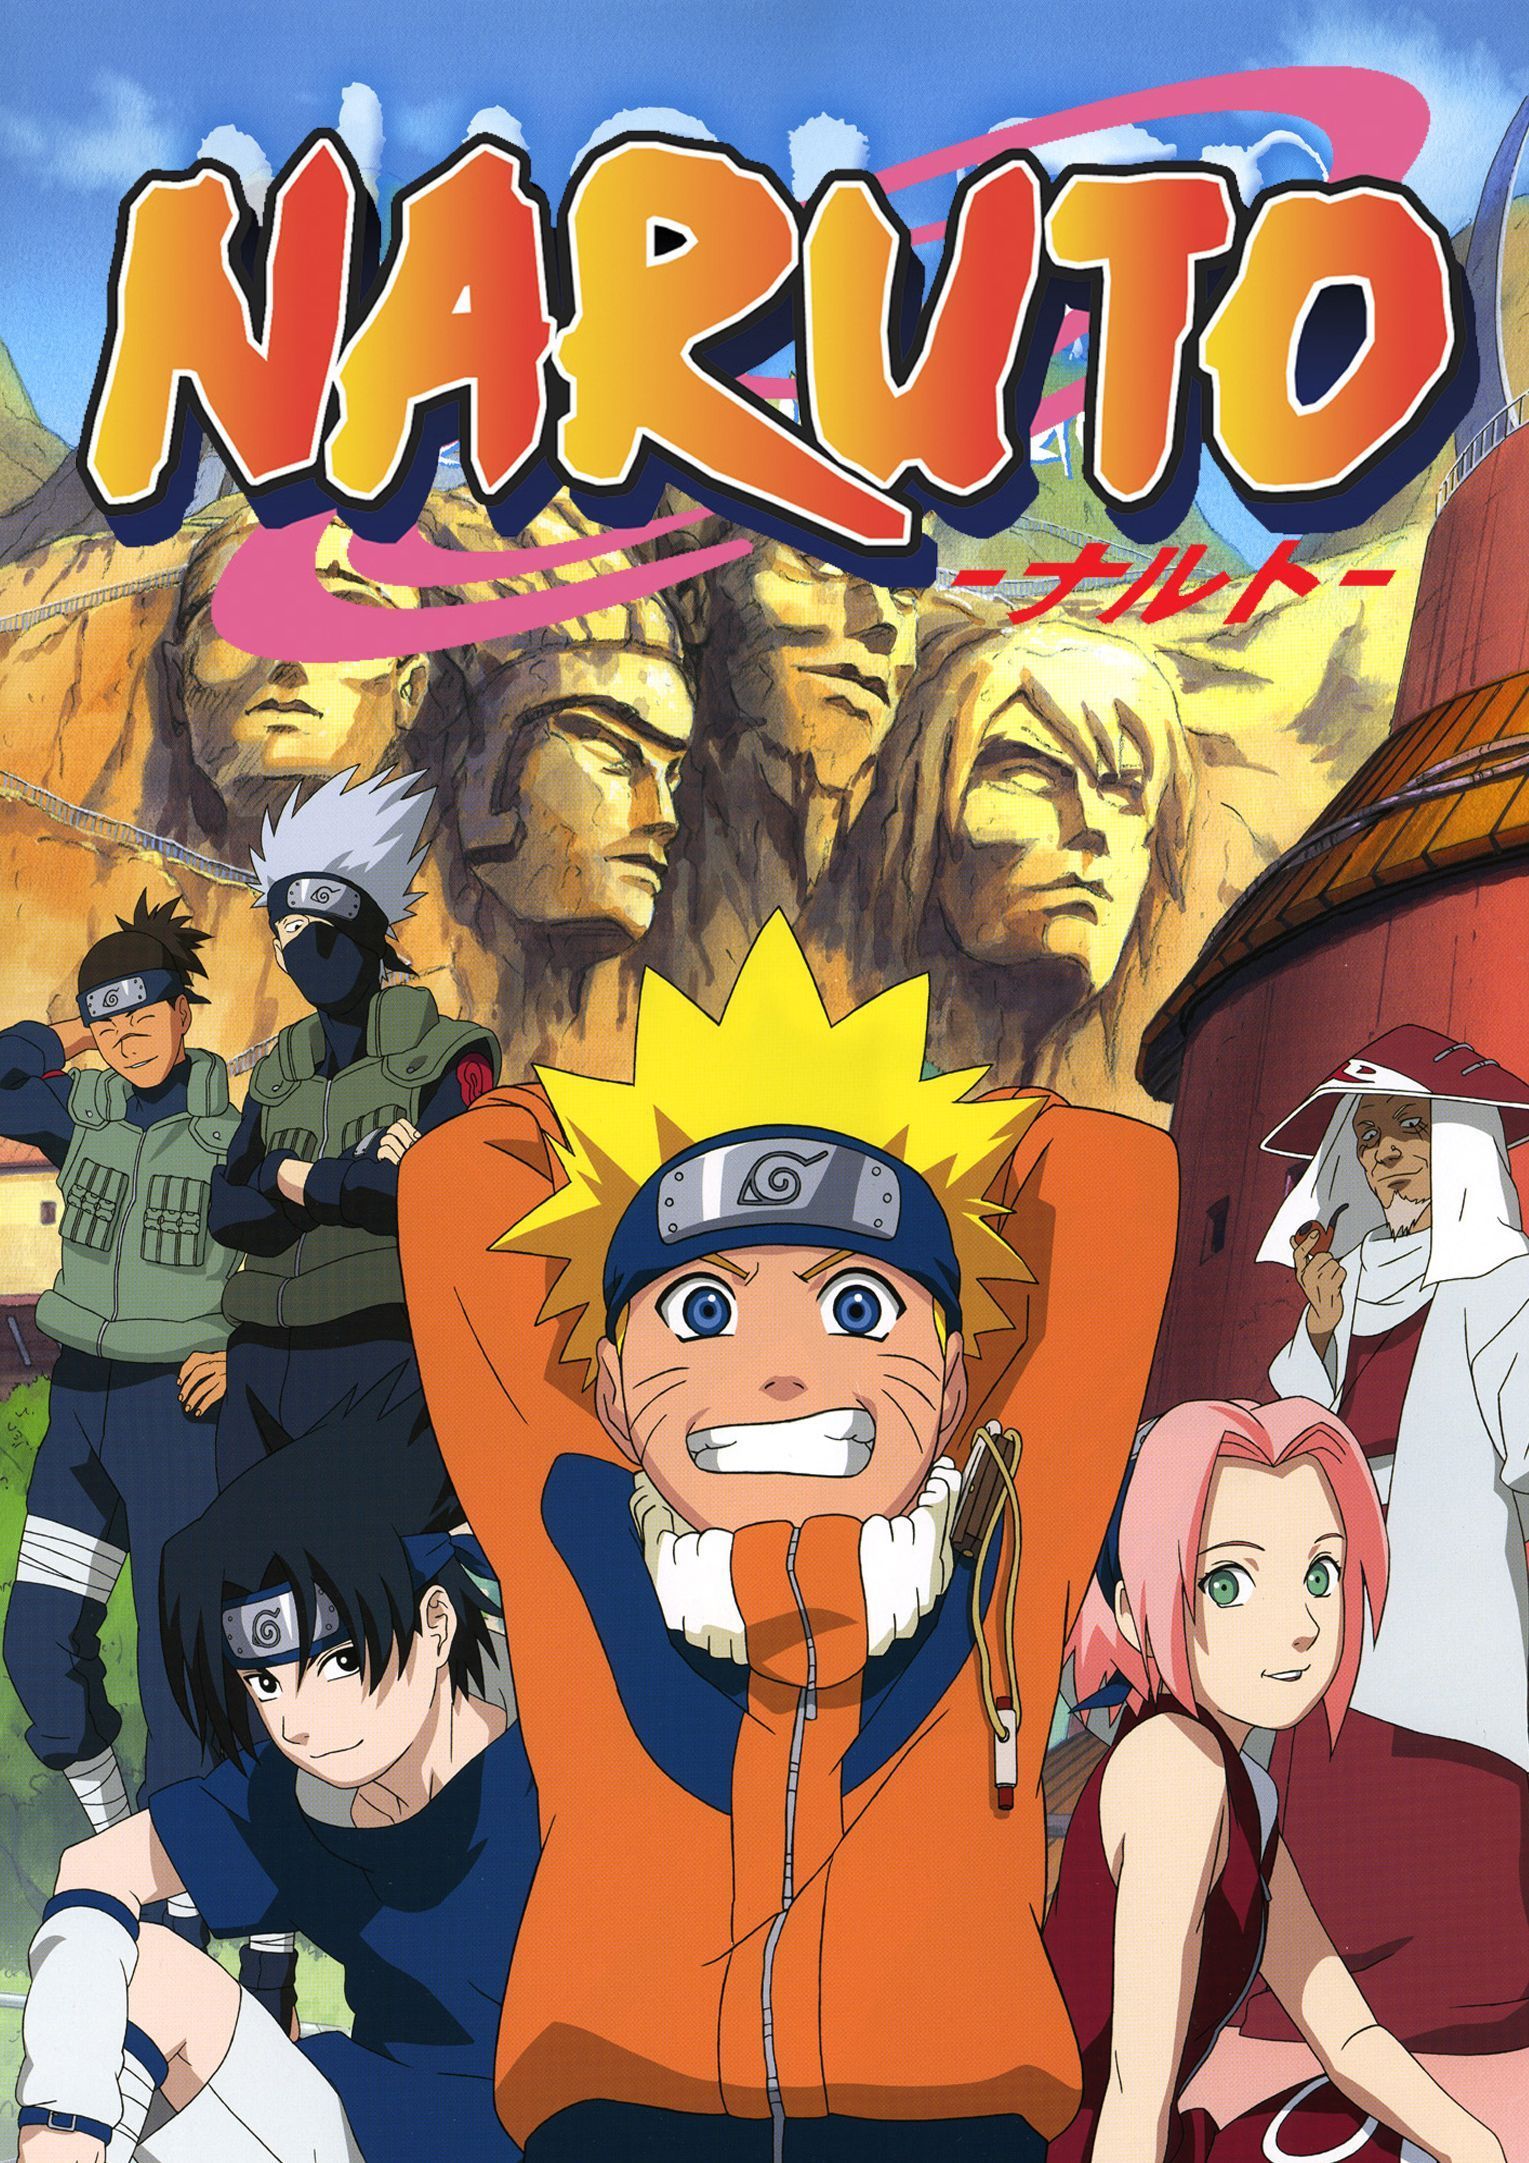 KARTMEN Naruto Posters Anime Poster Art Prints for Home Wall Decor Set of  8 PCS 12 in x18 in  Amazonin Home  Kitchen